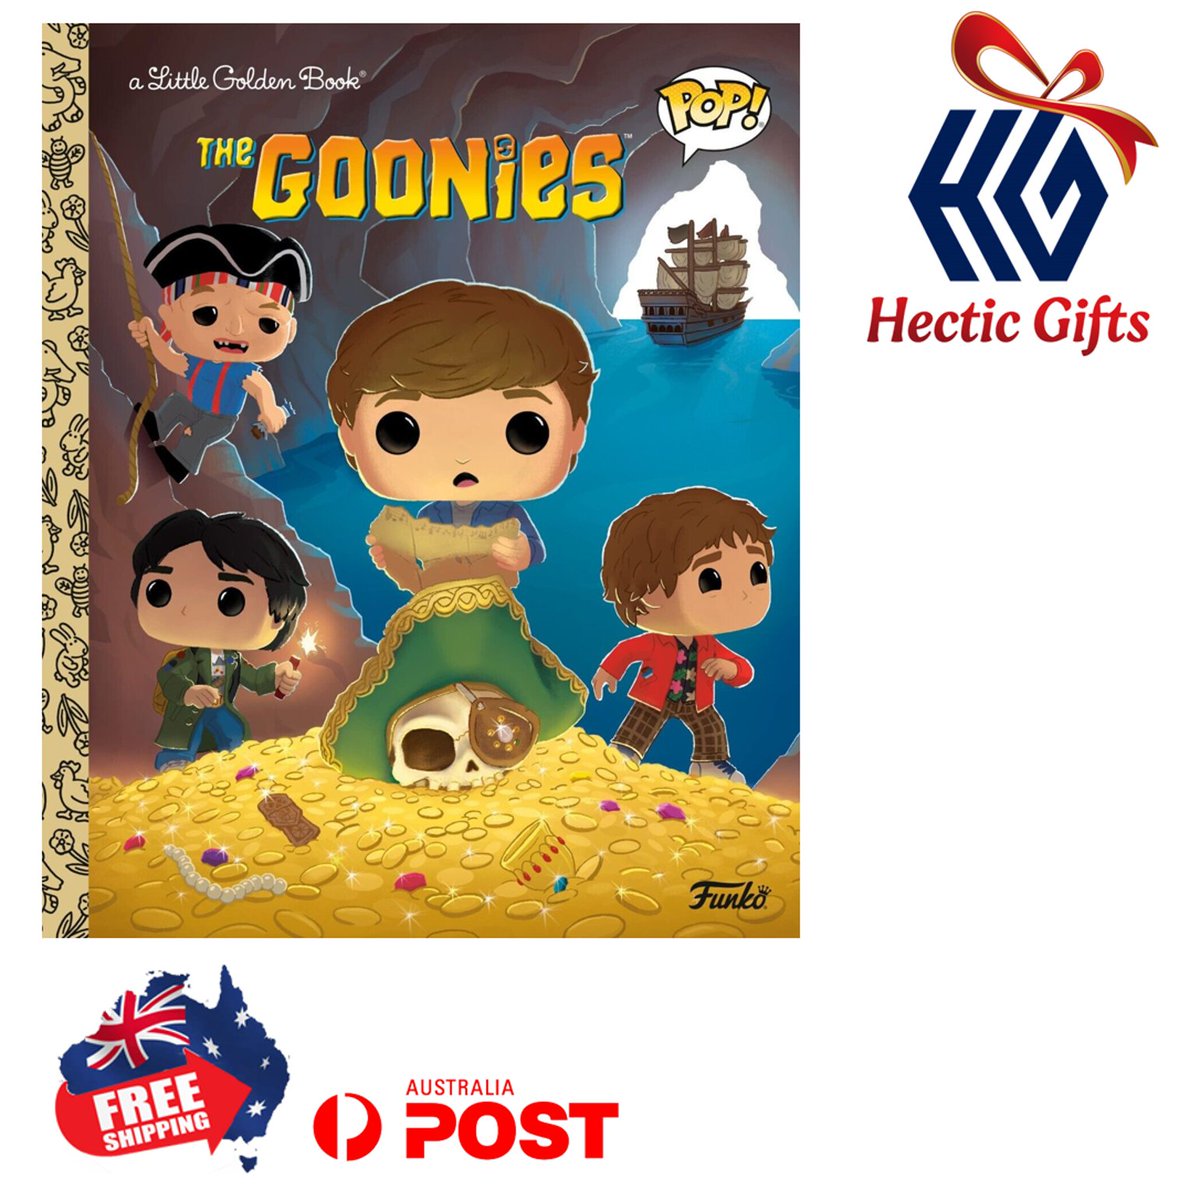 NEW Little Golden Book - The Goonies (Funko Pop!

ow.ly/97eq50PNIcq

#New #HecticGifts #TheGoonies #FunkoPop #LittleGoldenBook #LGB #Hardcover #Kids #Story #Book #Reading #Collectoble #FreeShipping #AustraliaWide #FastShipping